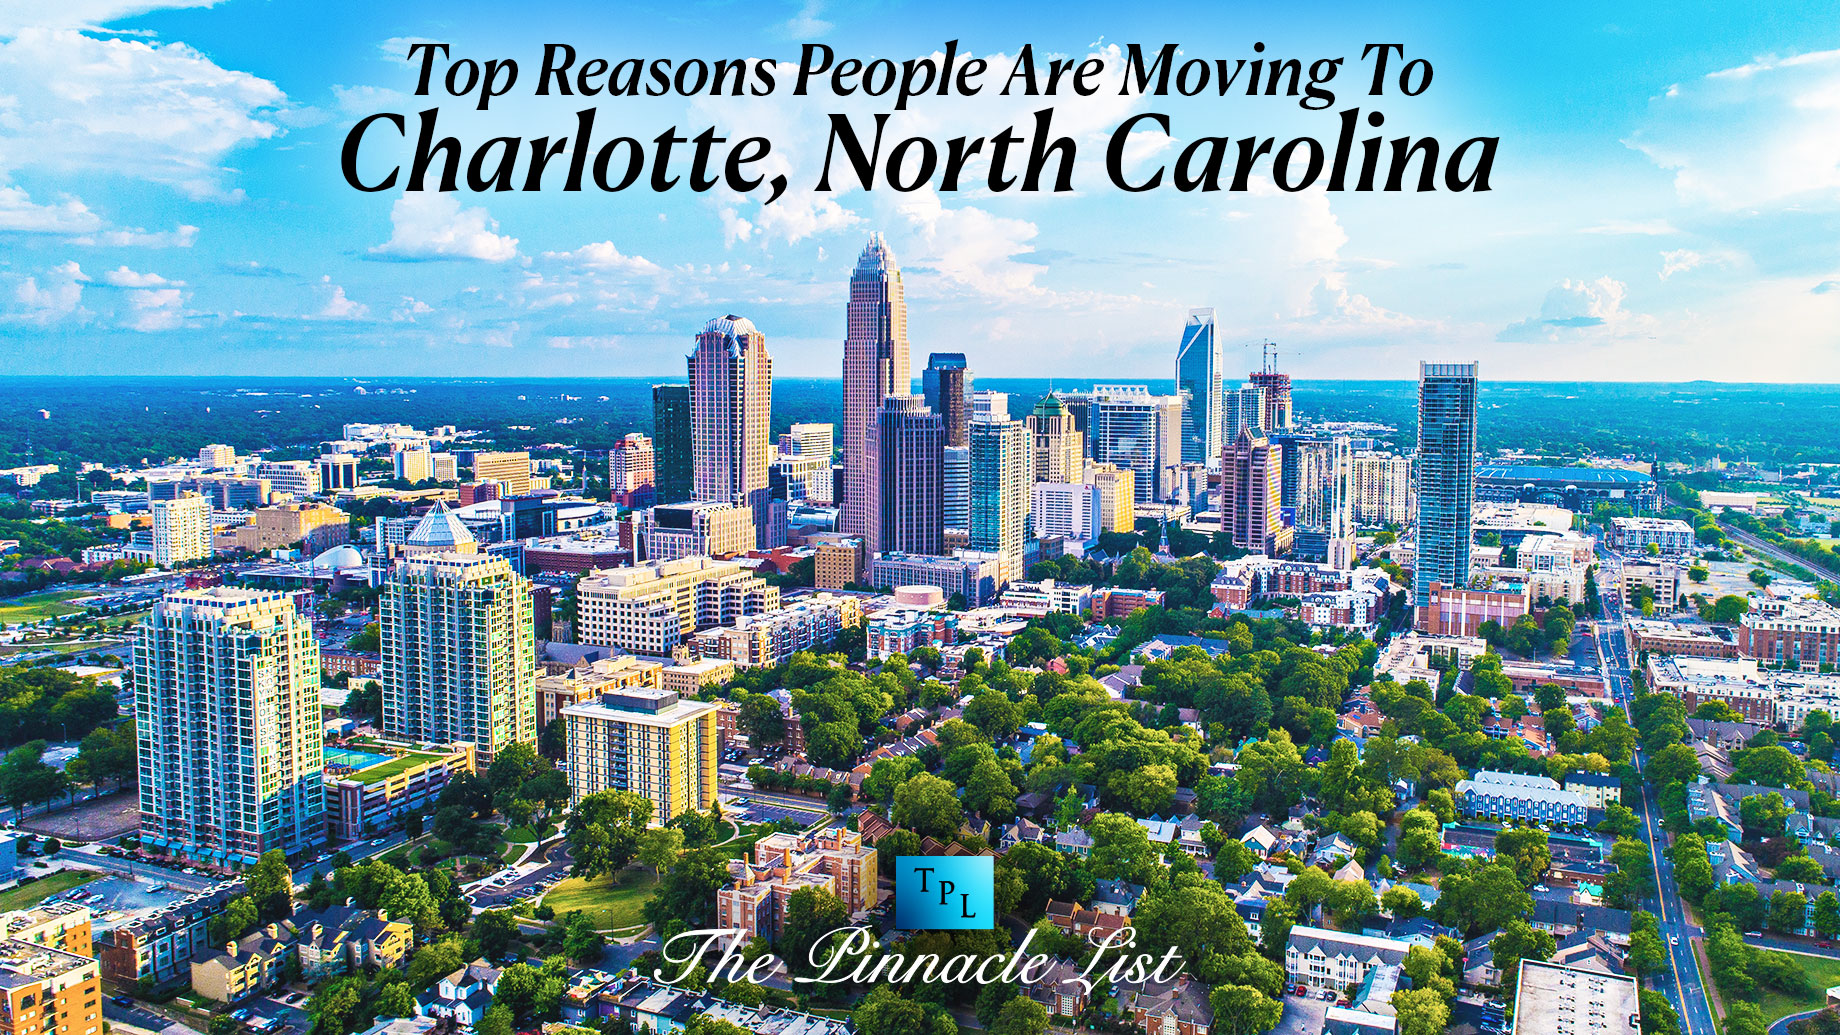 Top Reasons People Are Moving To Charlotte, North Carolina